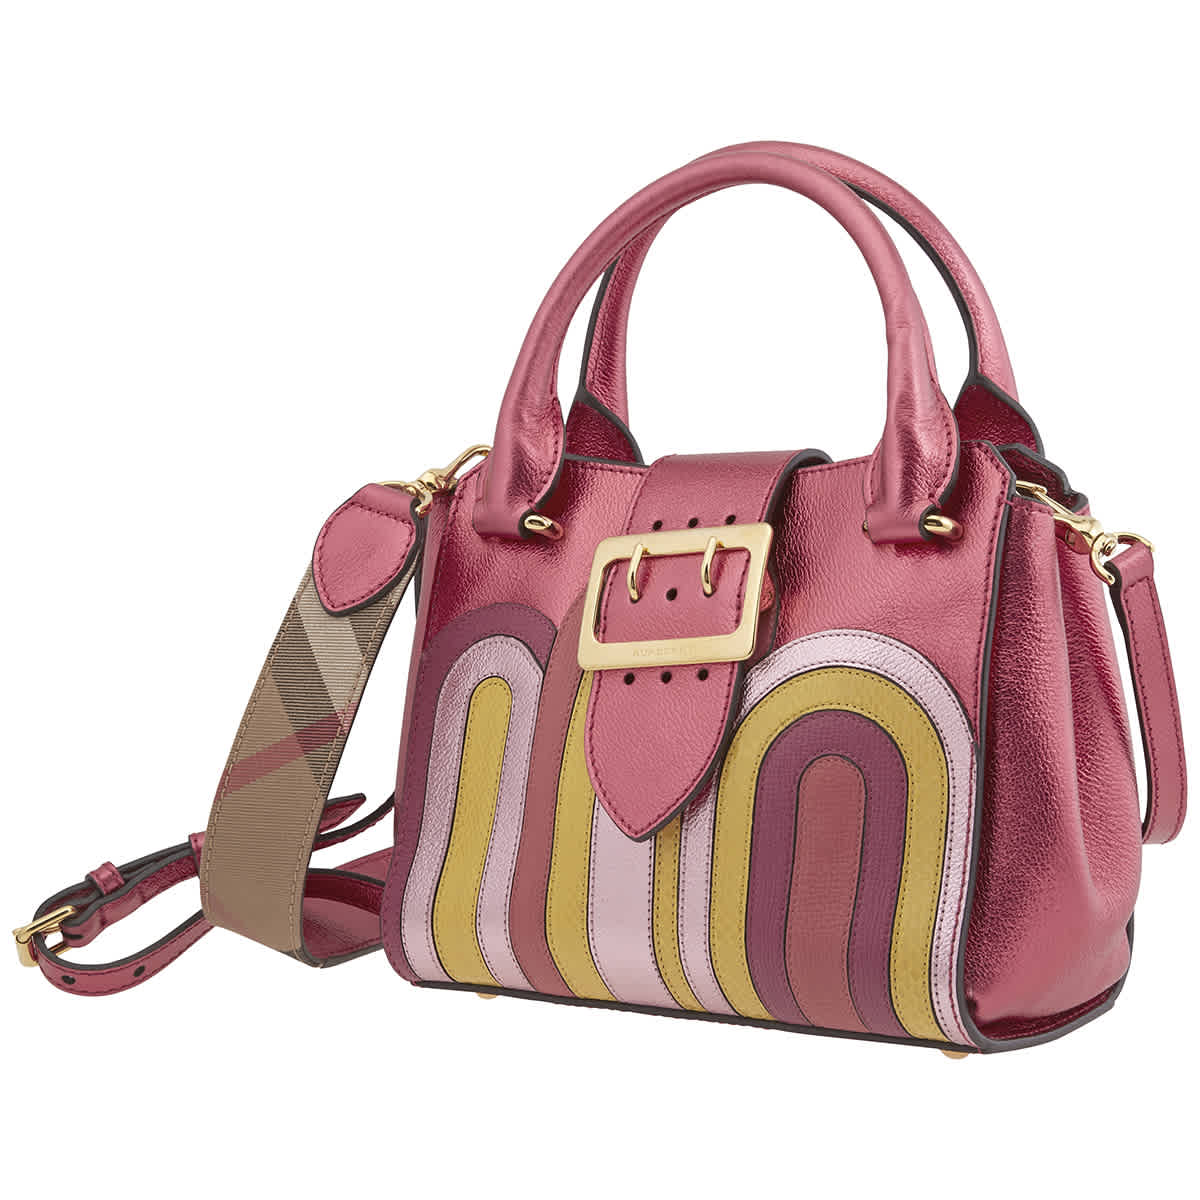 Burberry Buckle Small Leather & Python Tote In Bright Pink